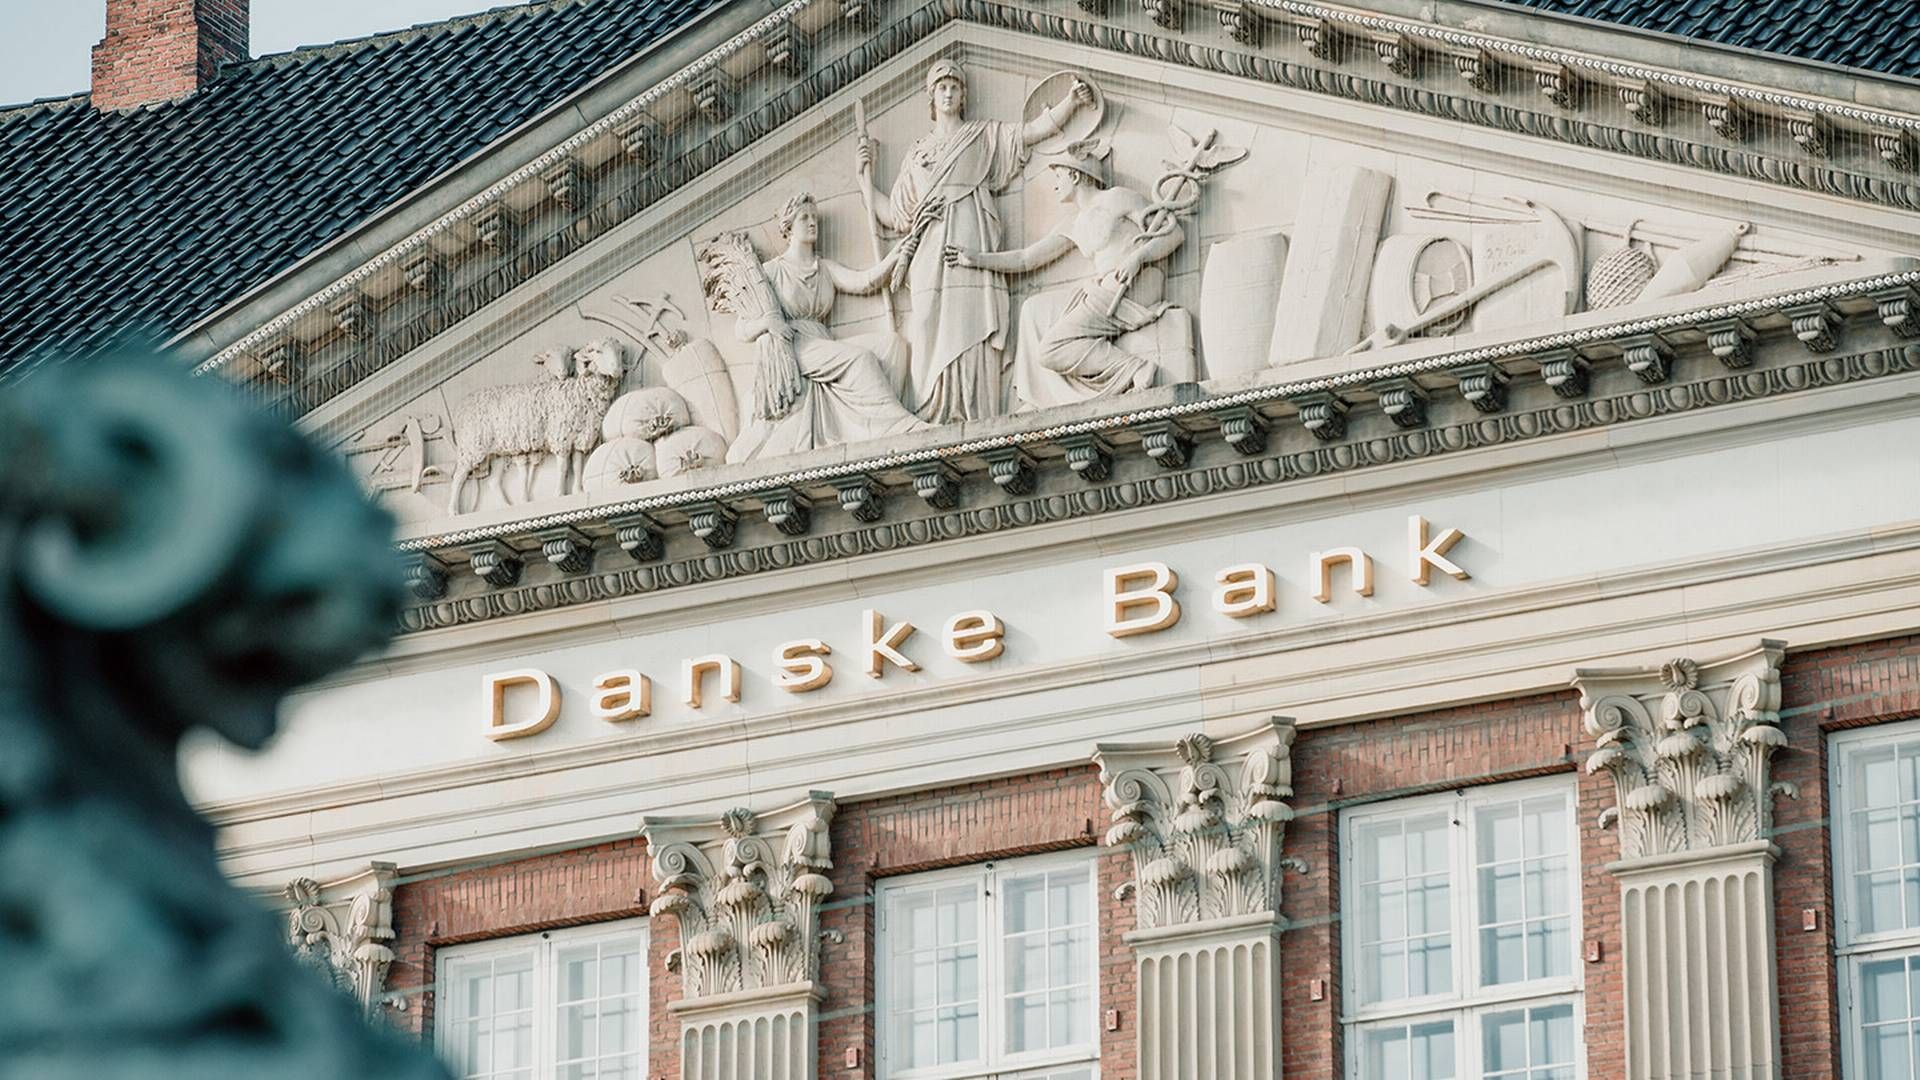 Danske Bank disclosed their climate plan in January. Few Danes view the bank as a contributor in regard to climate action, survey shows. | Photo: Philip Madsen